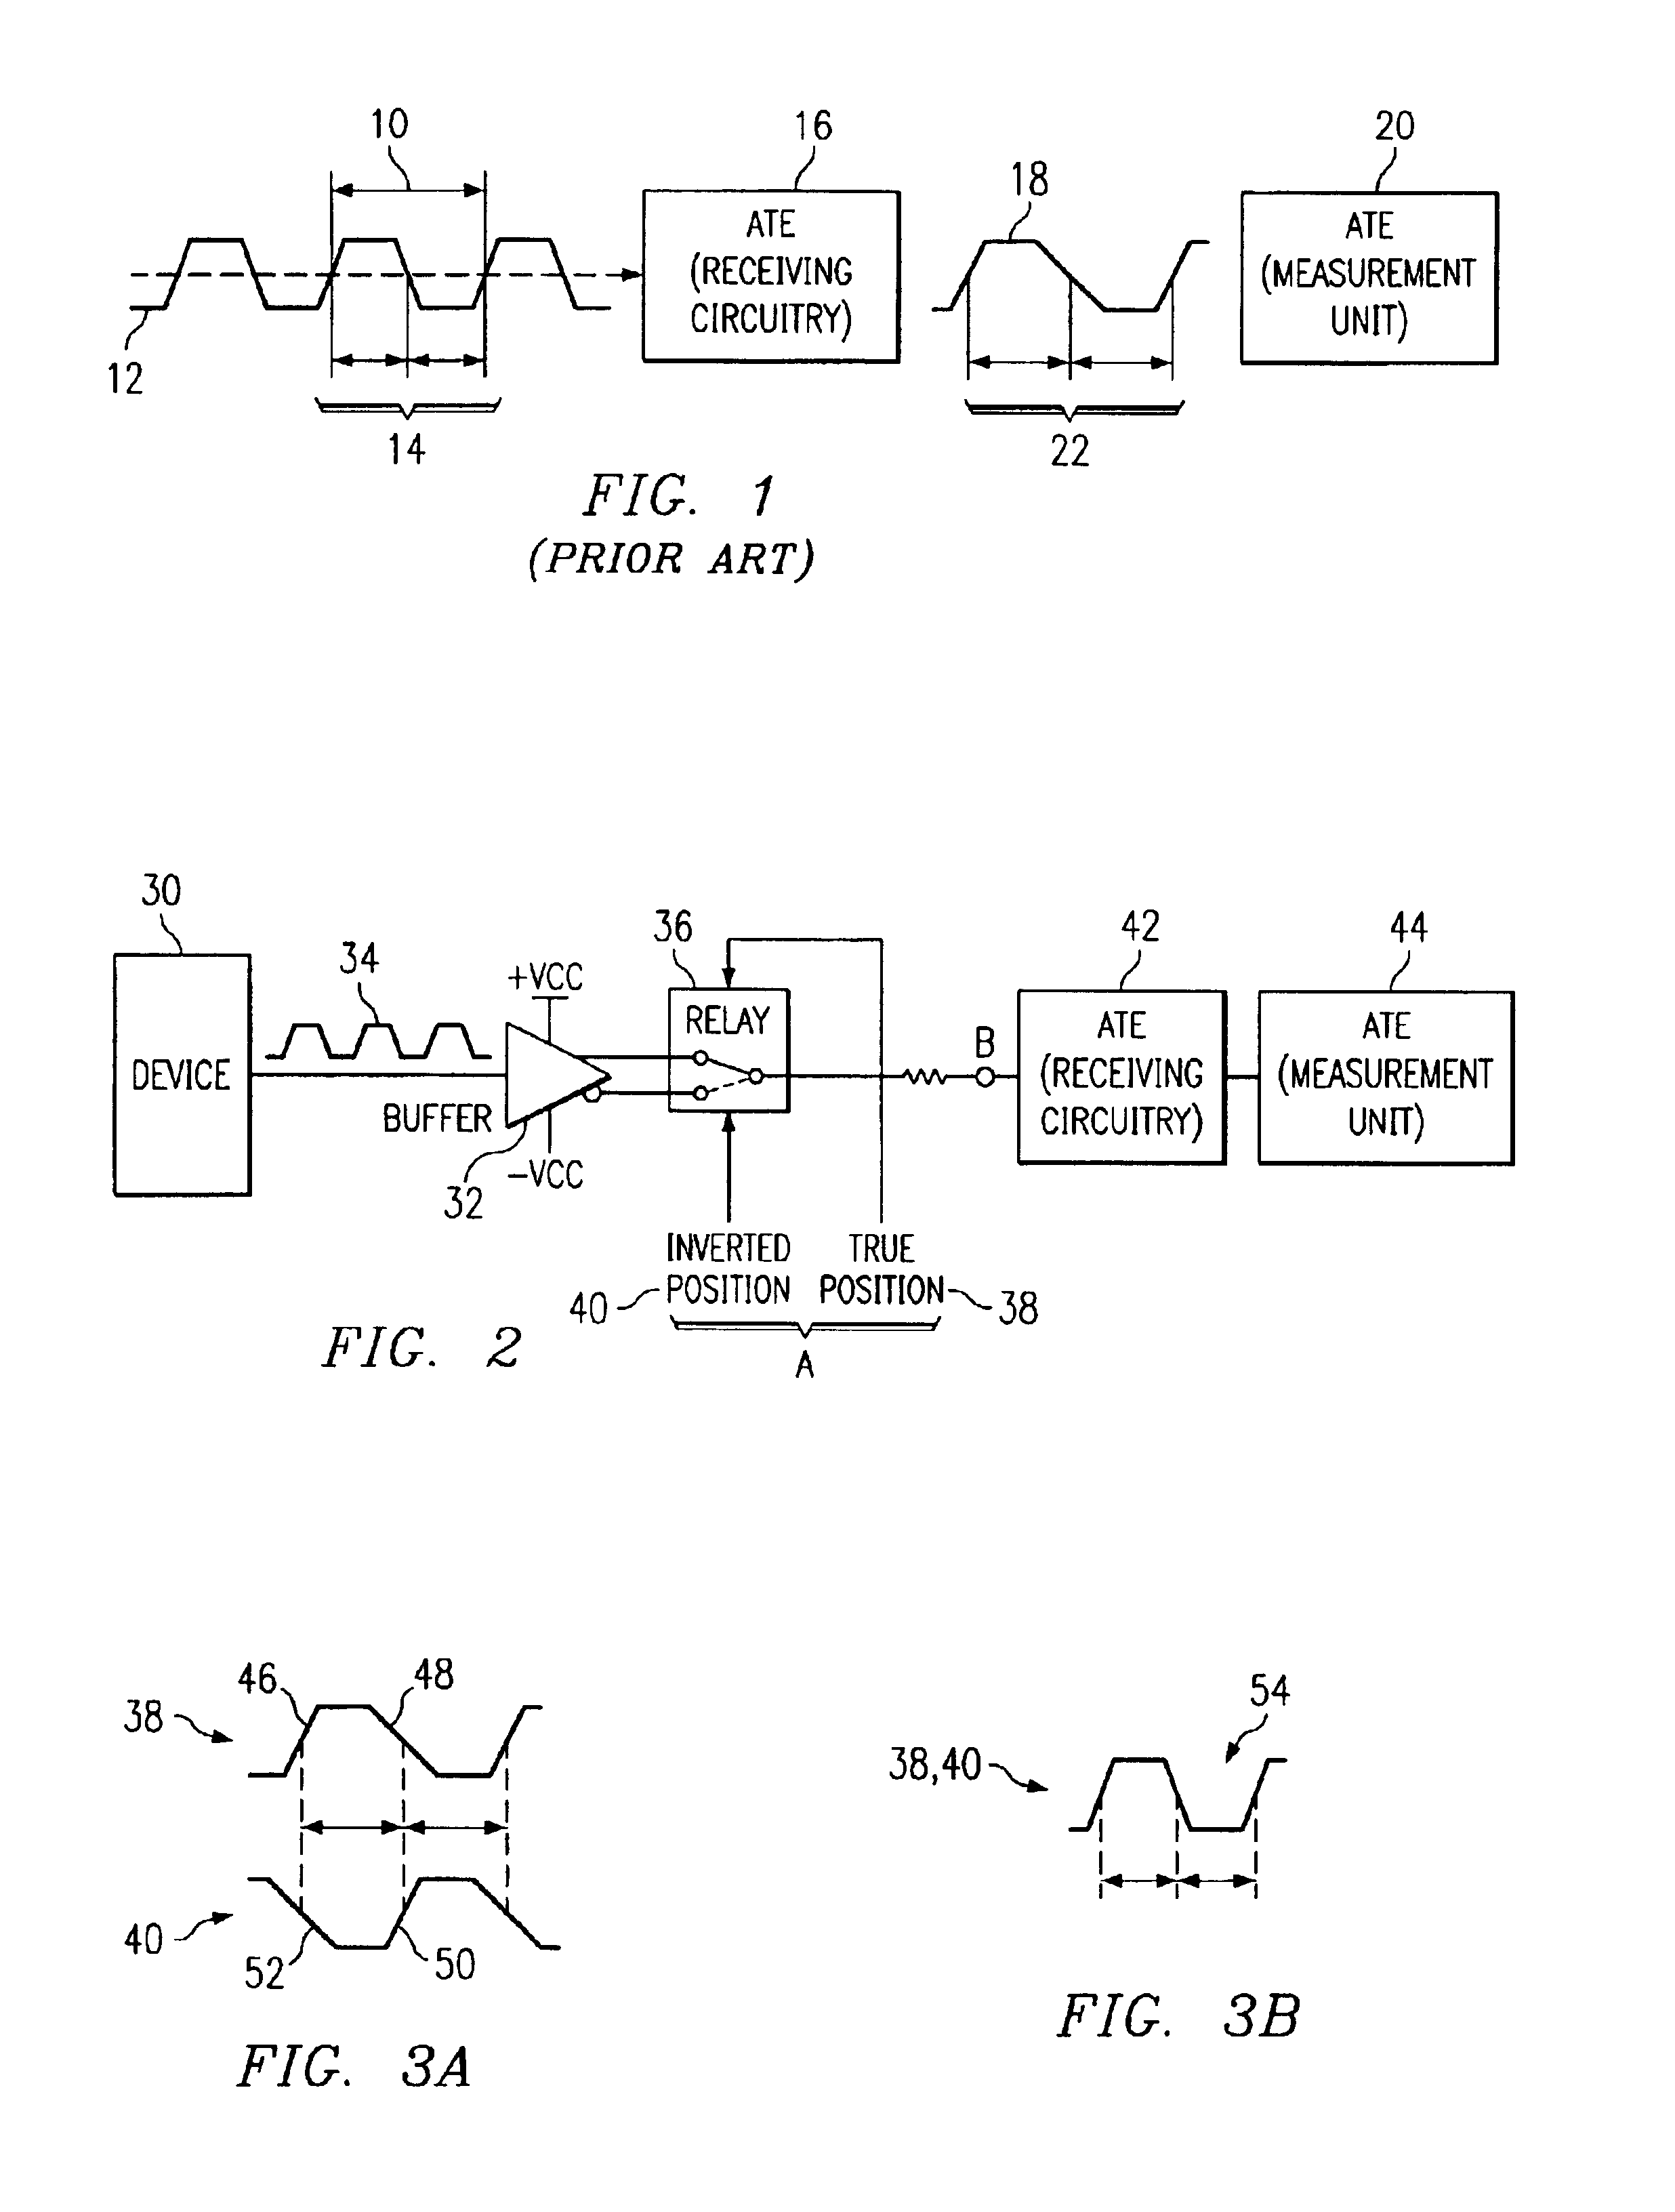 Accurate time measurement system circuit and method